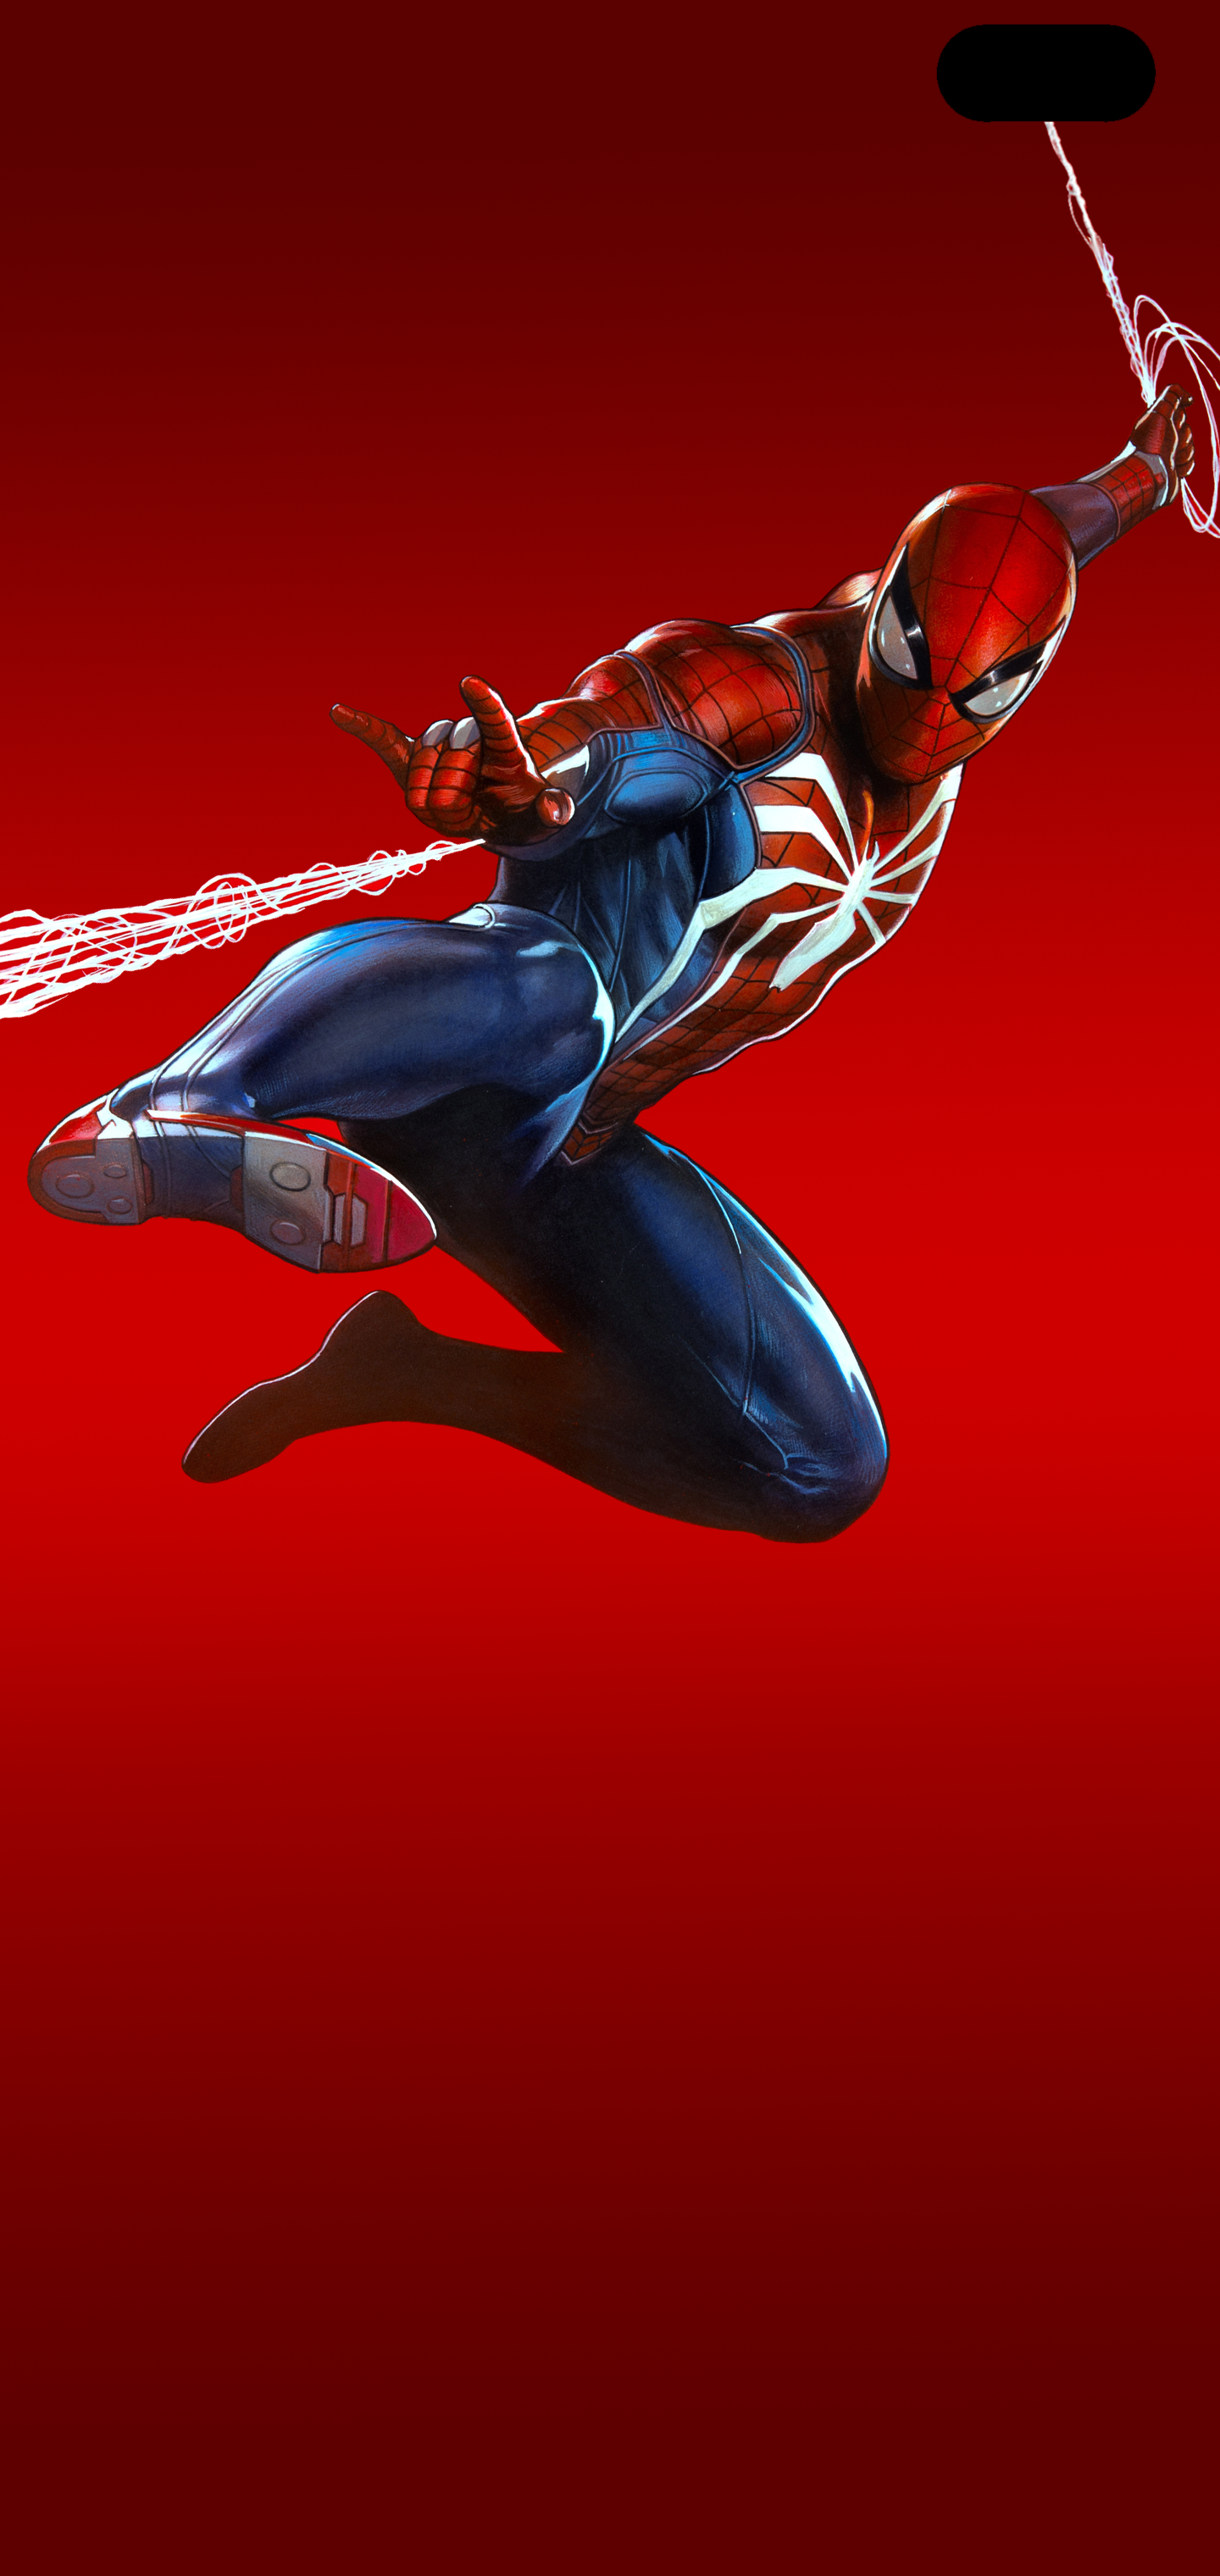 Download wallpaper 1280x2120 spiderman ps4 pro video game swing game  iphone 6 plus 1280x2120 hd background 8235